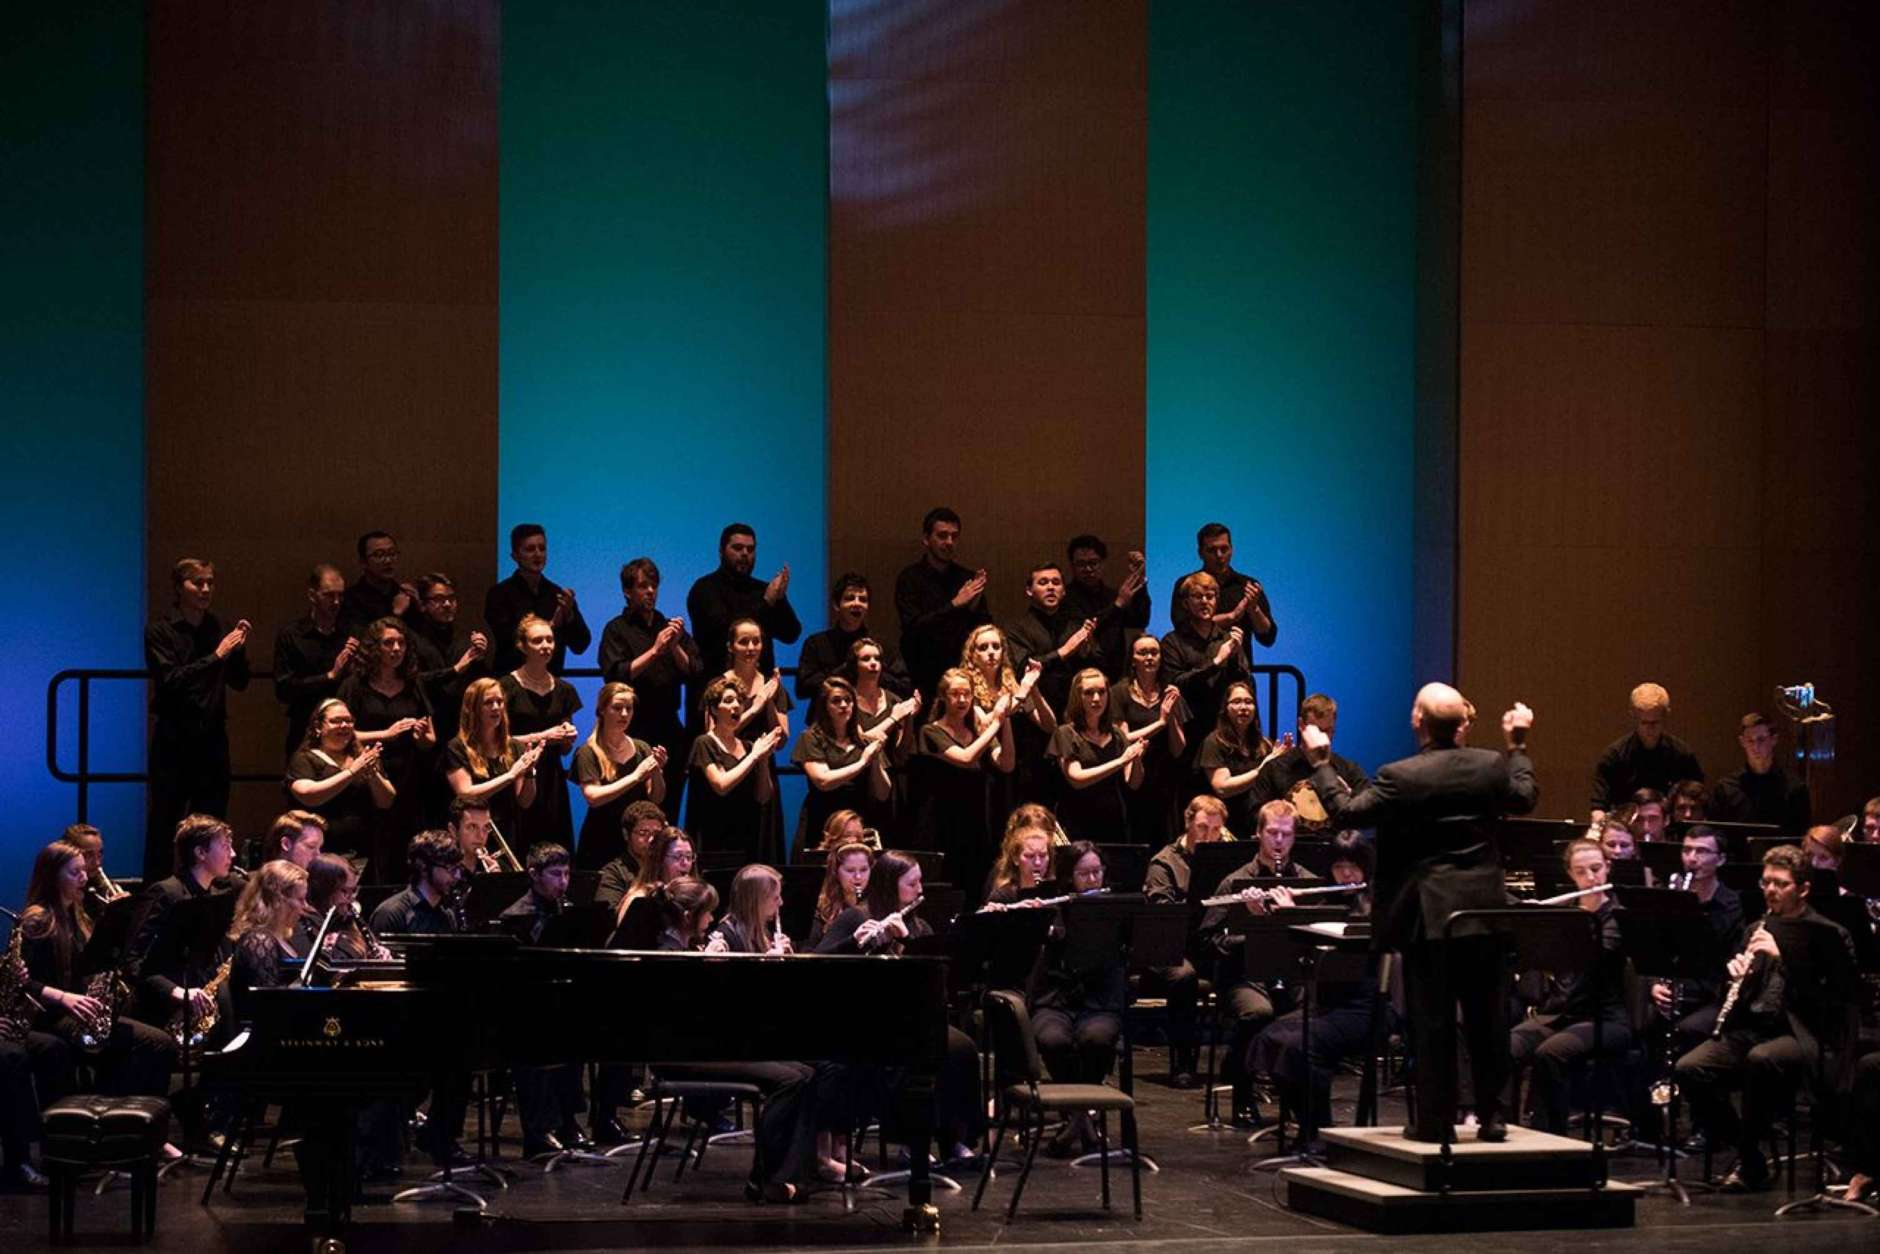 The Virginia Tech Chorus performs with the Wind Ensemble for the "Performance in Remembrance" at the Moss Arts Center on Friday, April 14, 2017. (Courtesy Virginia Tech)